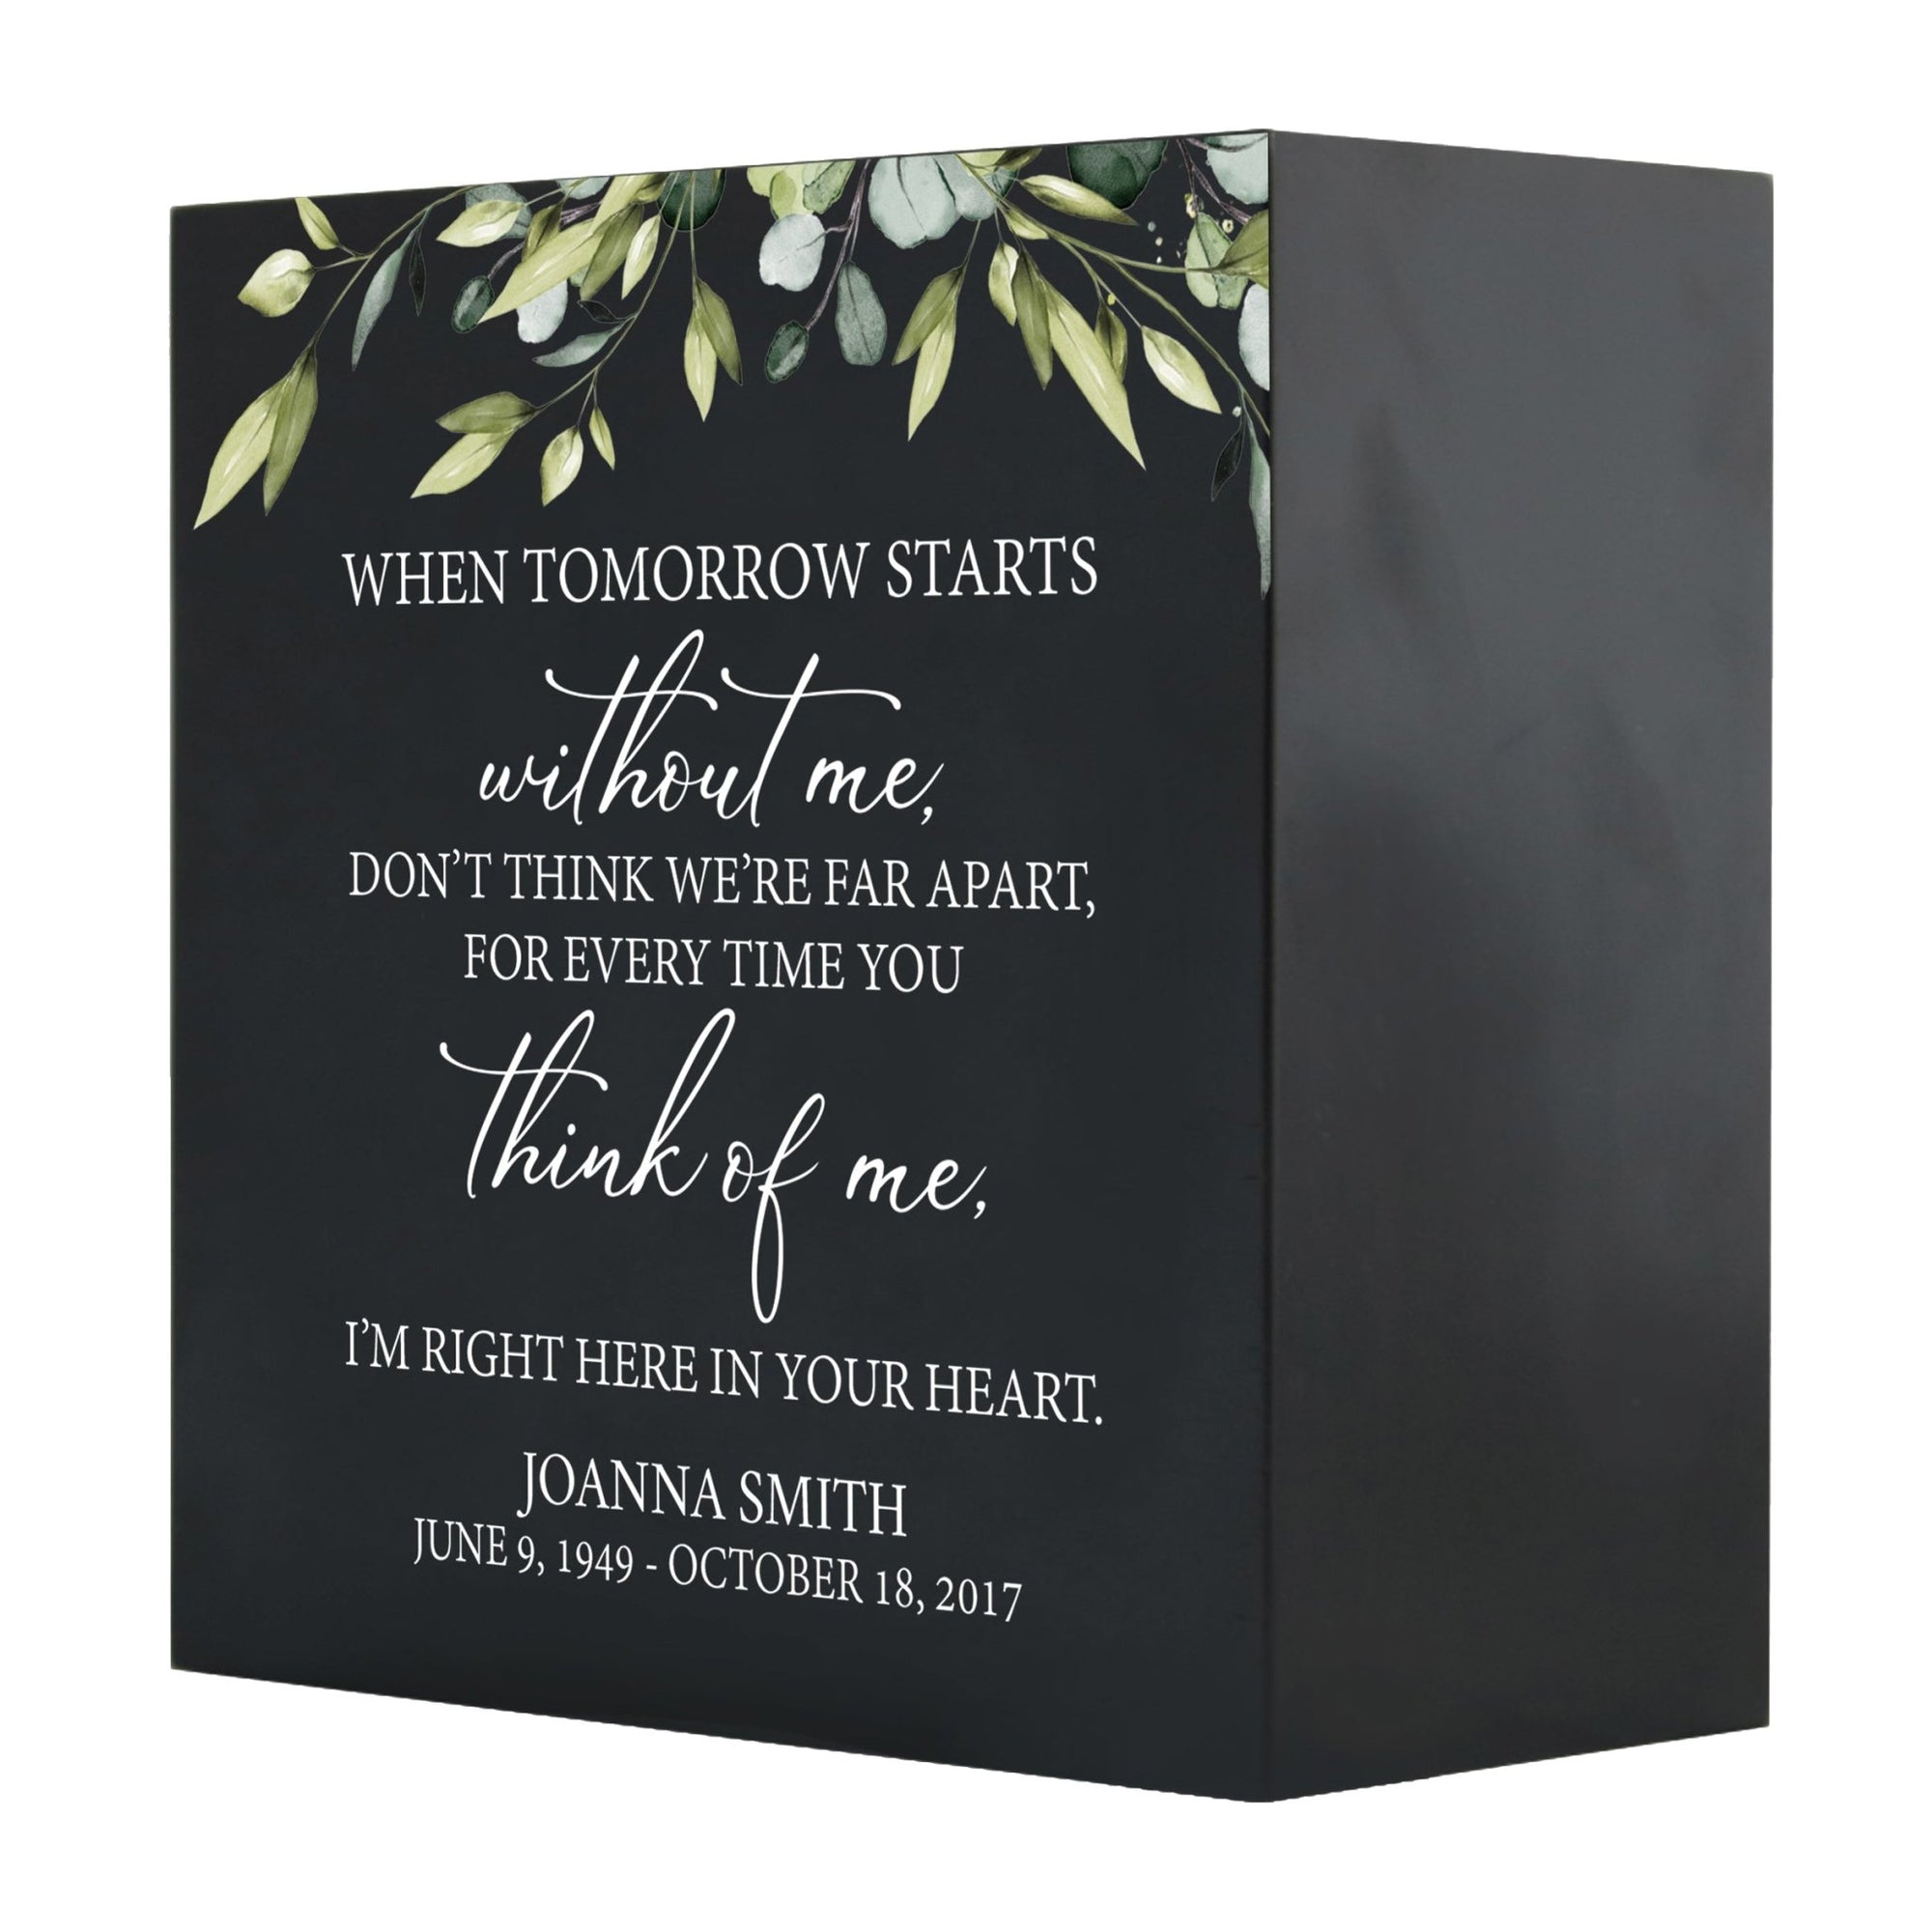 Personalized Modern Inspirational Memorial Wooden Shadow Box and Urn 6x6 holds 53 cu in of Human Ashes - When Tomorrow Starts (Black) - LifeSong Milestones